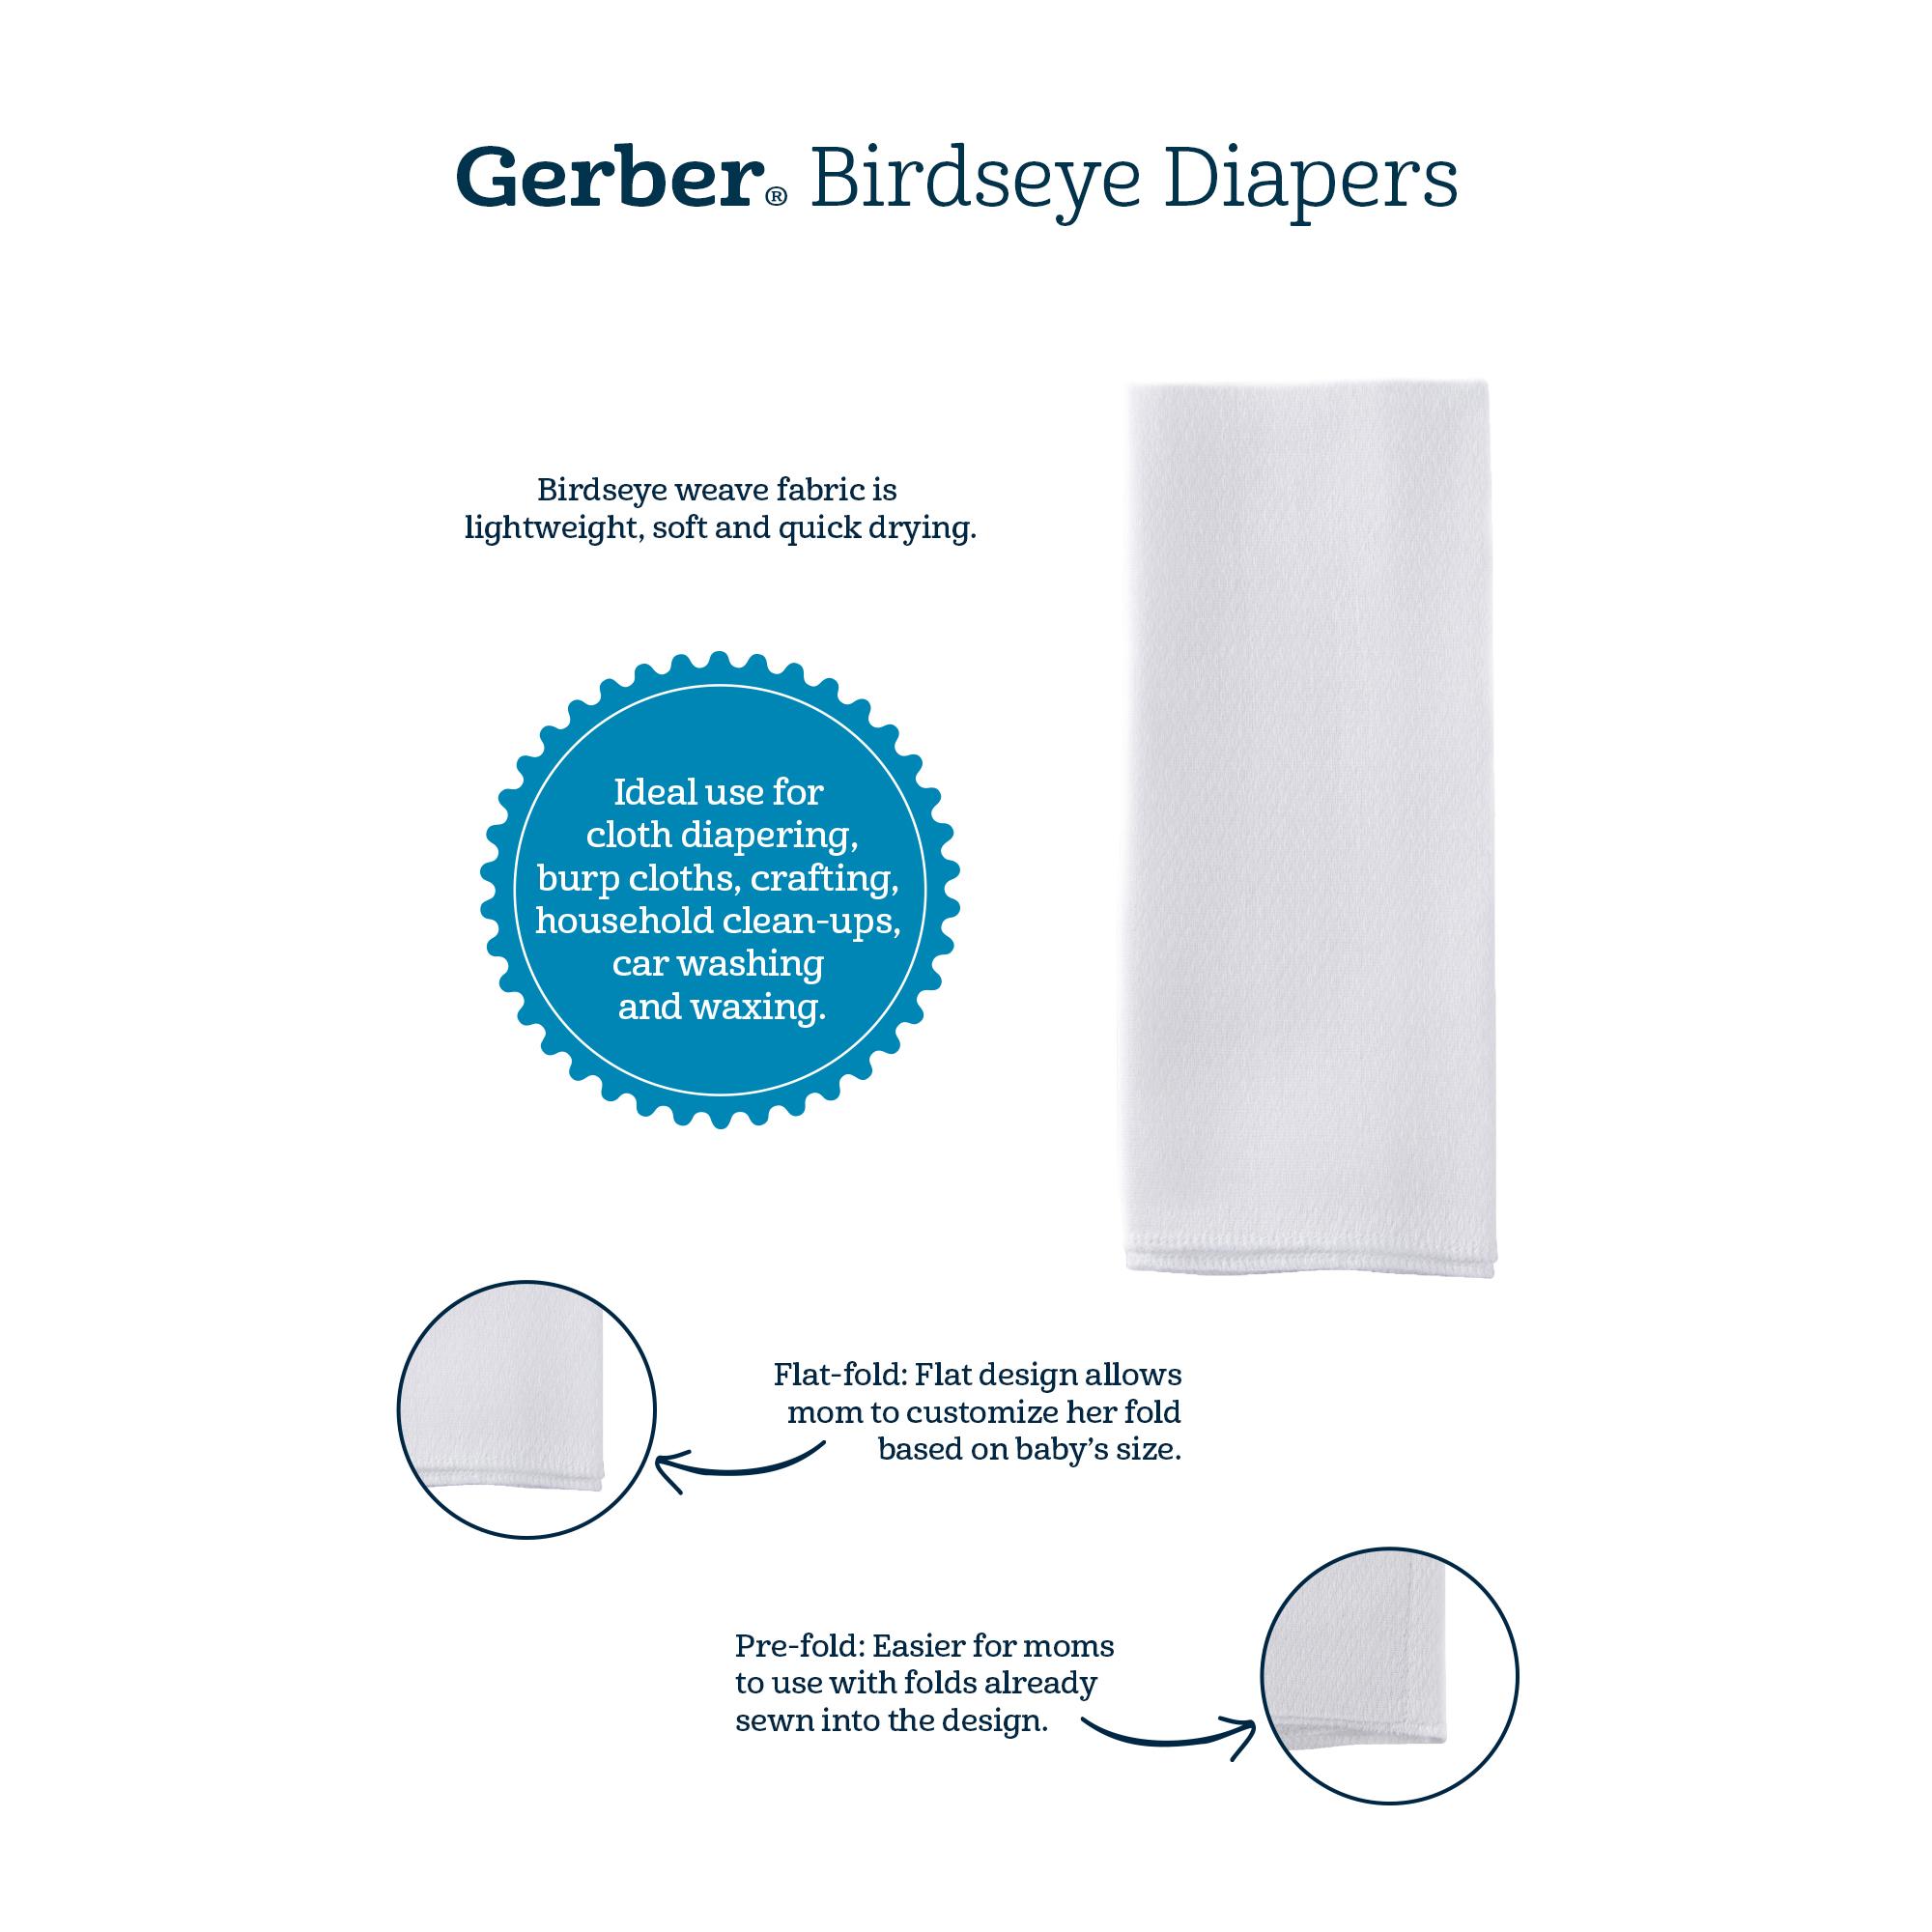 Gerber 100% Cotton Flatfold Cloth Baby Diaper, White 10 Pack - image 2 of 8